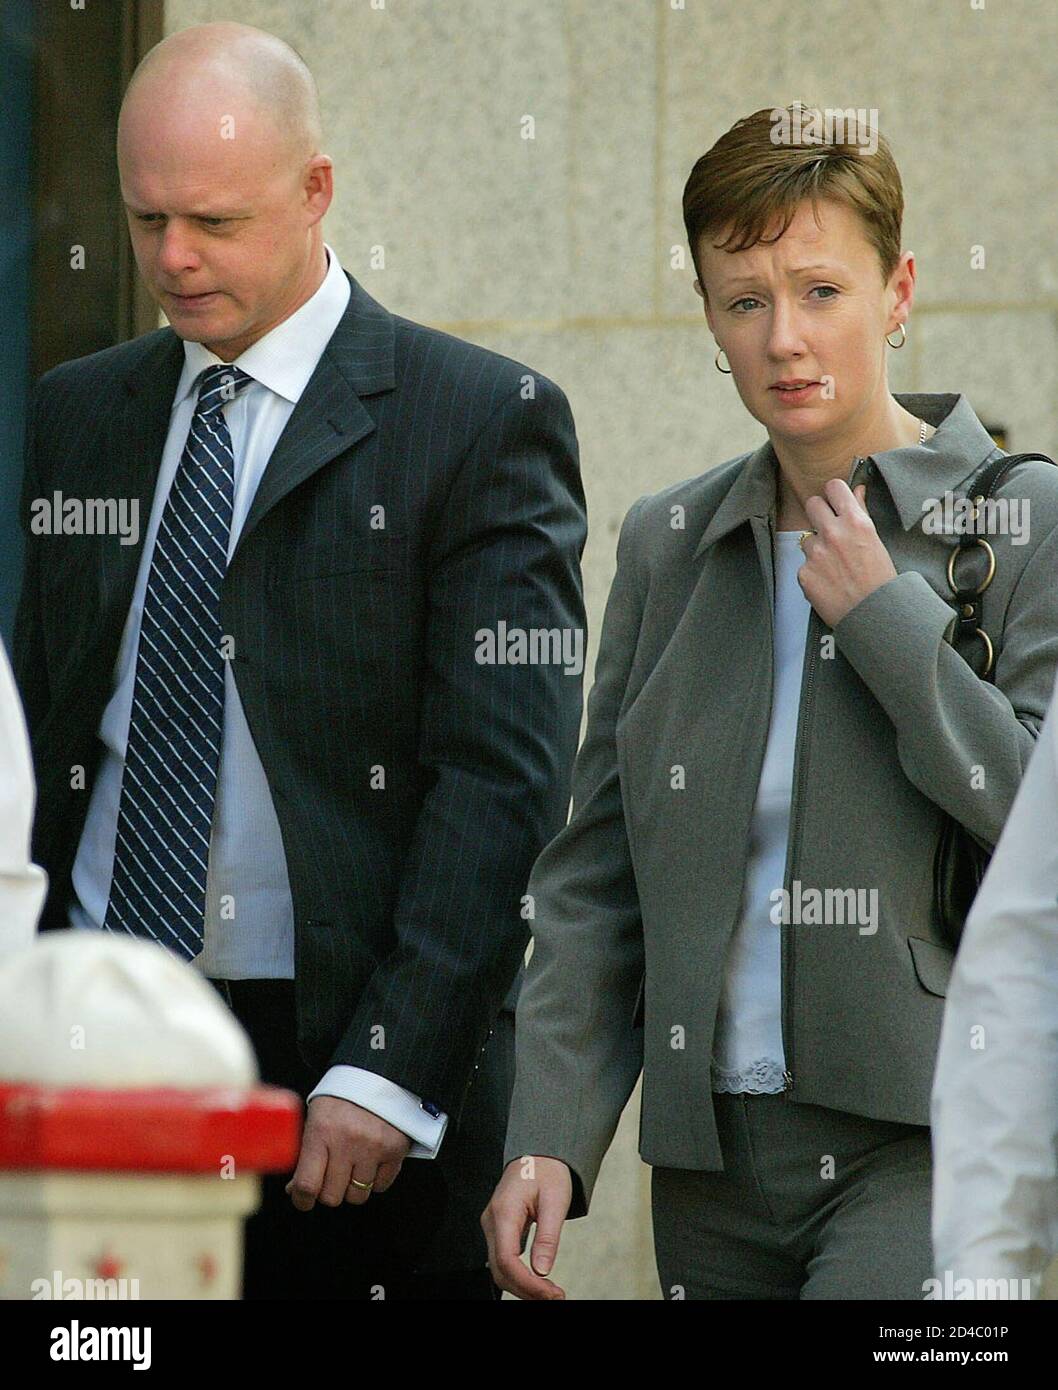 Parents of murdered Soham schoolgirl Holly Wells, (L-R) Kevin and Nicola, leave the Old Bailey in London, April 16, 2003. Former school caretaker Ian Huntley on Wednesday denied killing two schoolgirls Holly Wells and Jessica Chapman from Soham in Cambridgeshire, Britain in August 2002, in a double murder which shocked the country and sparked calls for a return of the death penalty. Huntley's girlfriend at the time of the deaths, former teaching assistant Maxine Carr, denied two charges of helping an offender and a charge of perverting the course of justice. REUTERS/Peter Macdiarmid  PKM/ASA Stock Photo